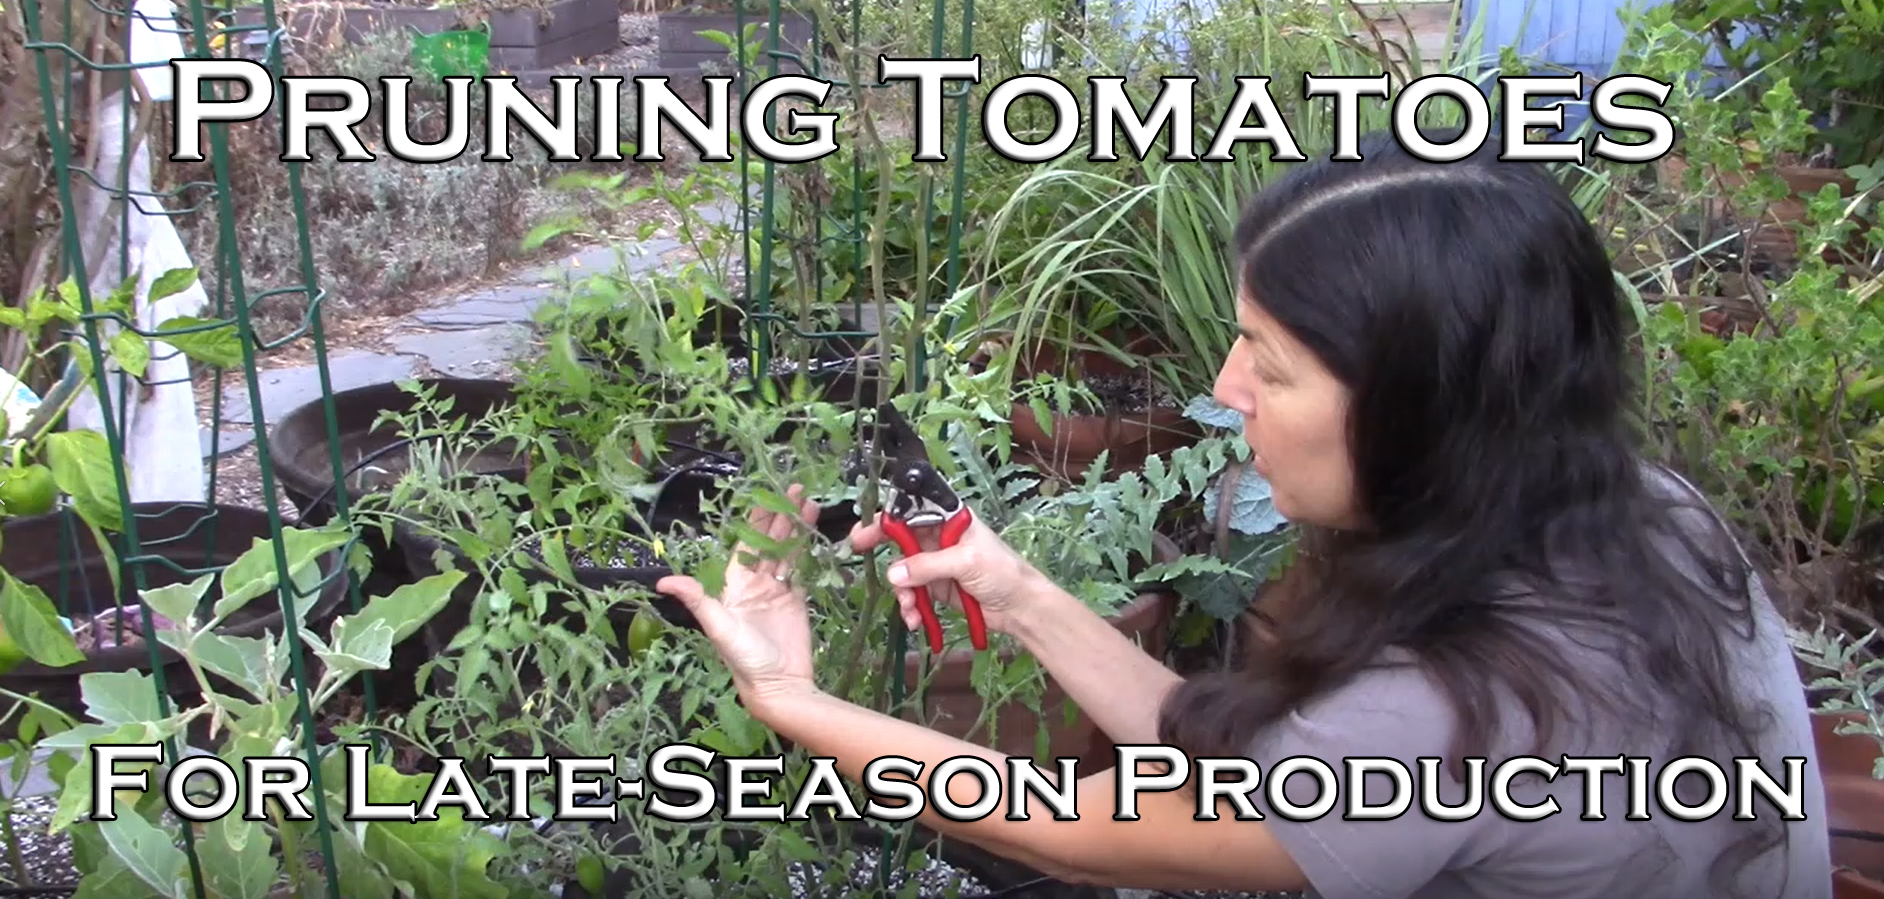 You are currently viewing YouTube: How To Prune Tomatoes For Late-Season Production